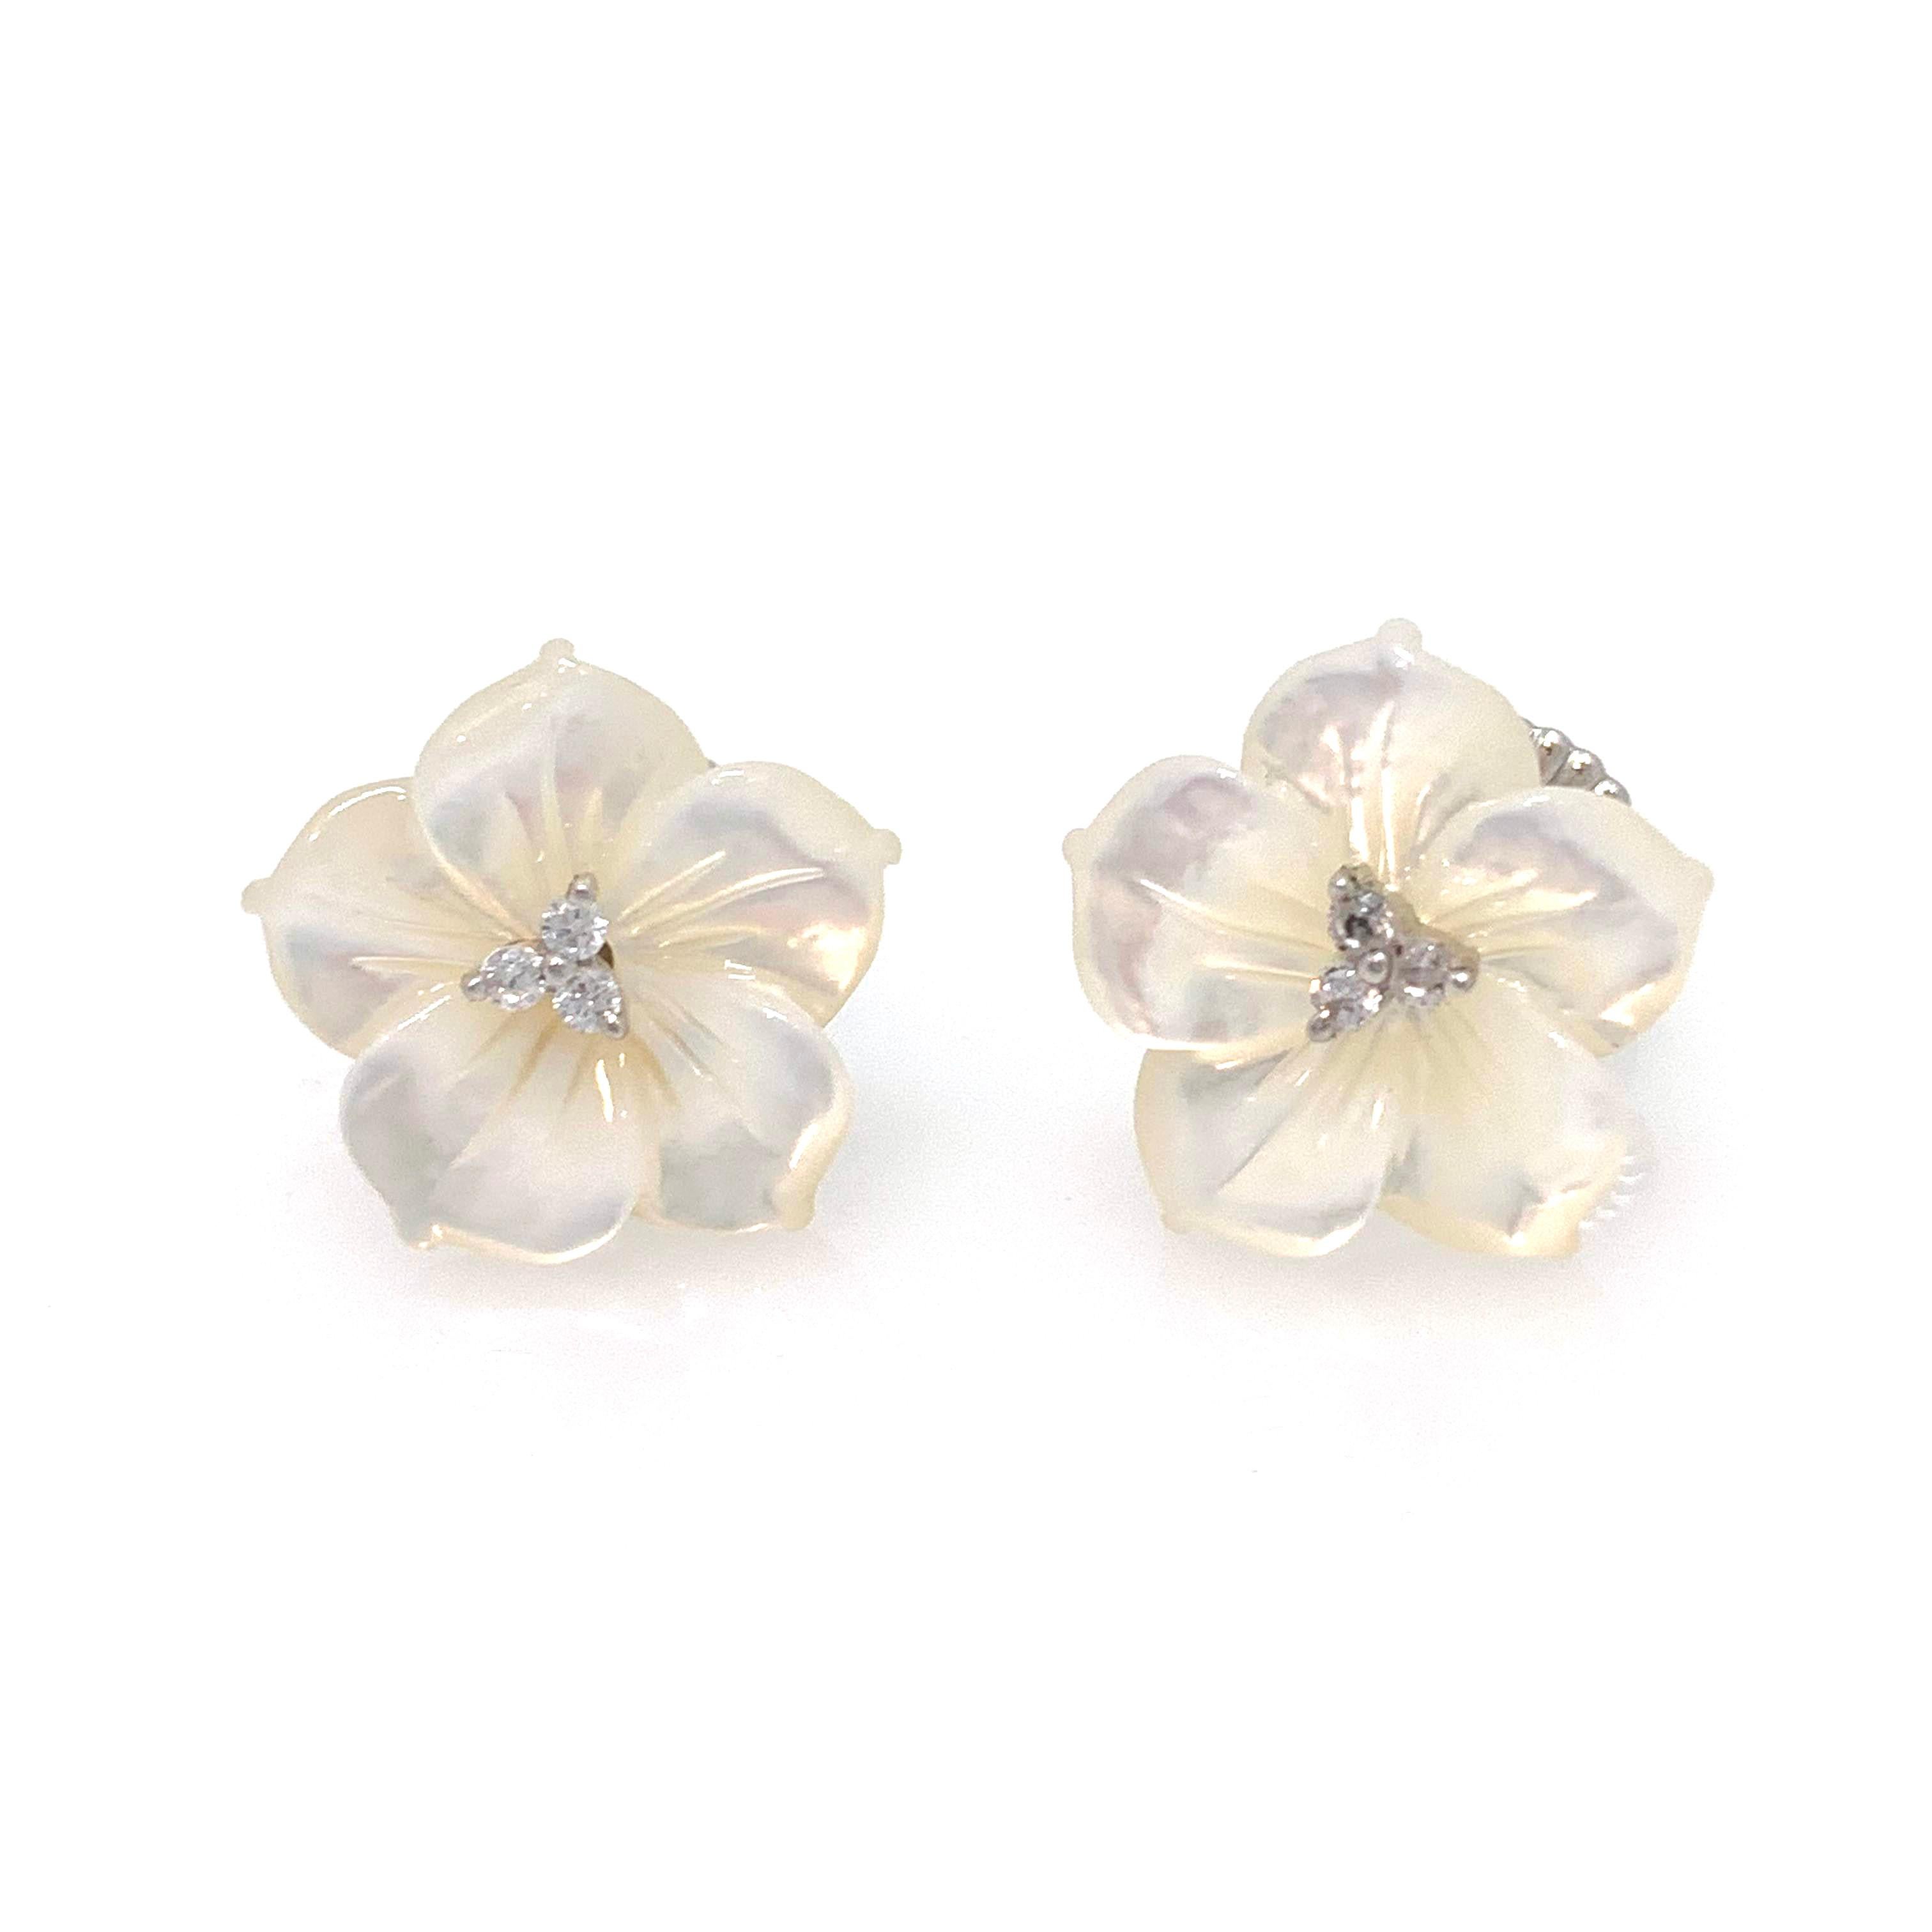 Elegant 18mm Carved Mother of Pearl Flower Sterling Silver Earrings

This earrings features 2 pieces of 18mm mother of pearl carved into beautiful three dimension flower, adorned with round simulated diamond cz, handset in platinum  rhodium plated